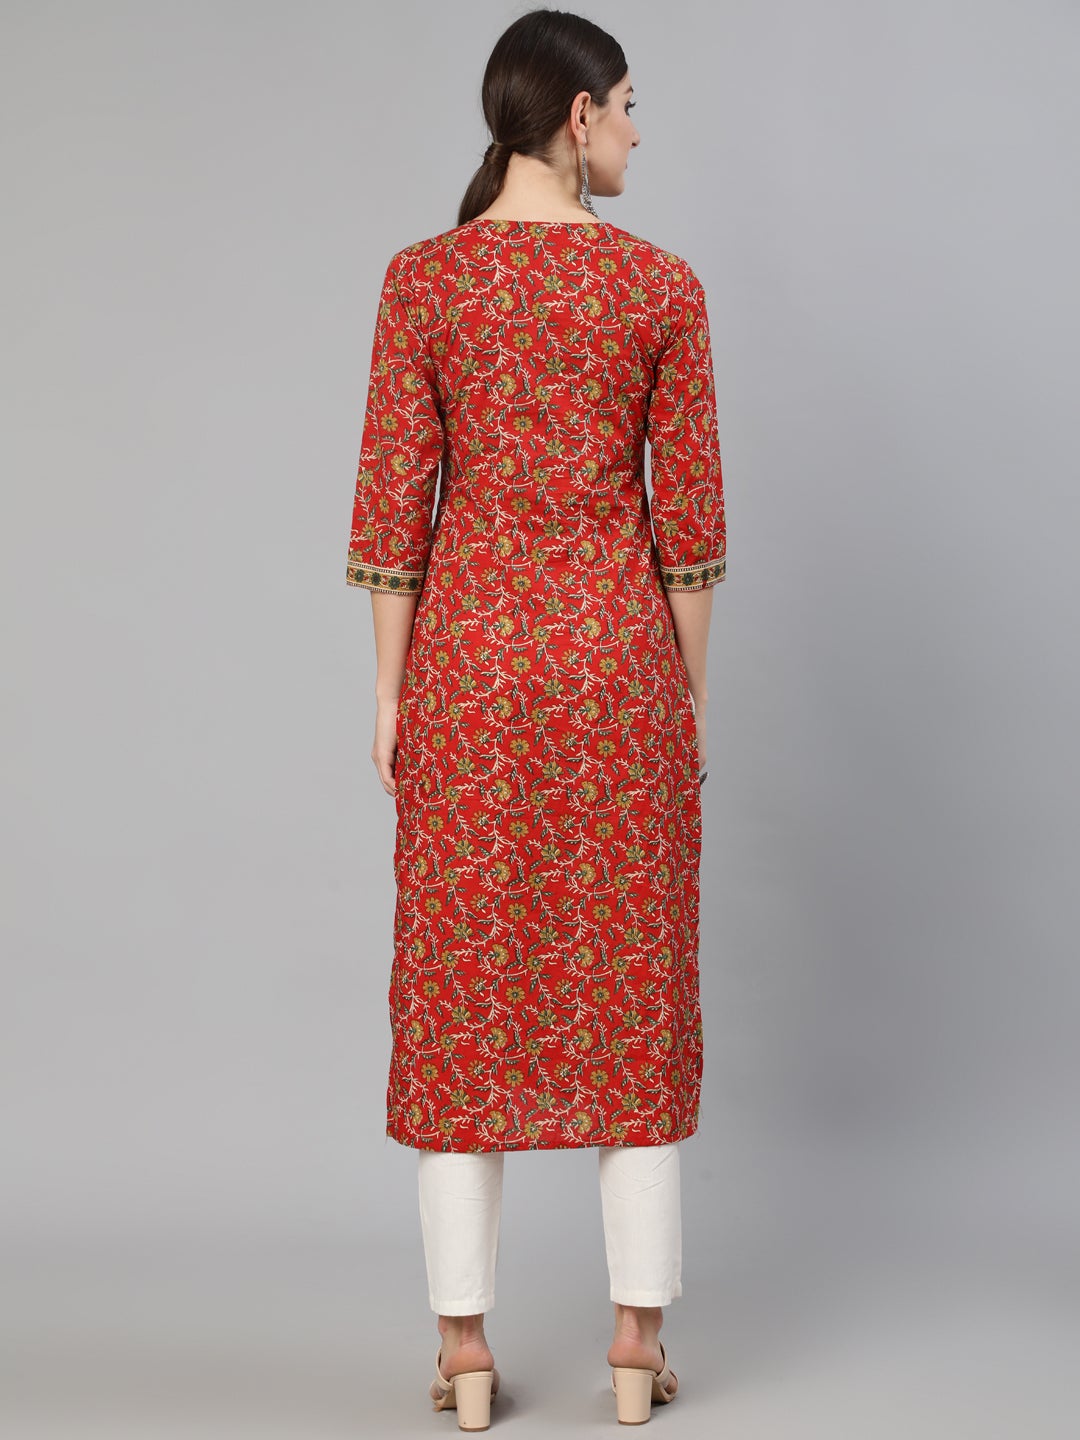 Women's Red Floral Printed  Straight Kurta With Three Quarter Sleeves - Nayo Clothing